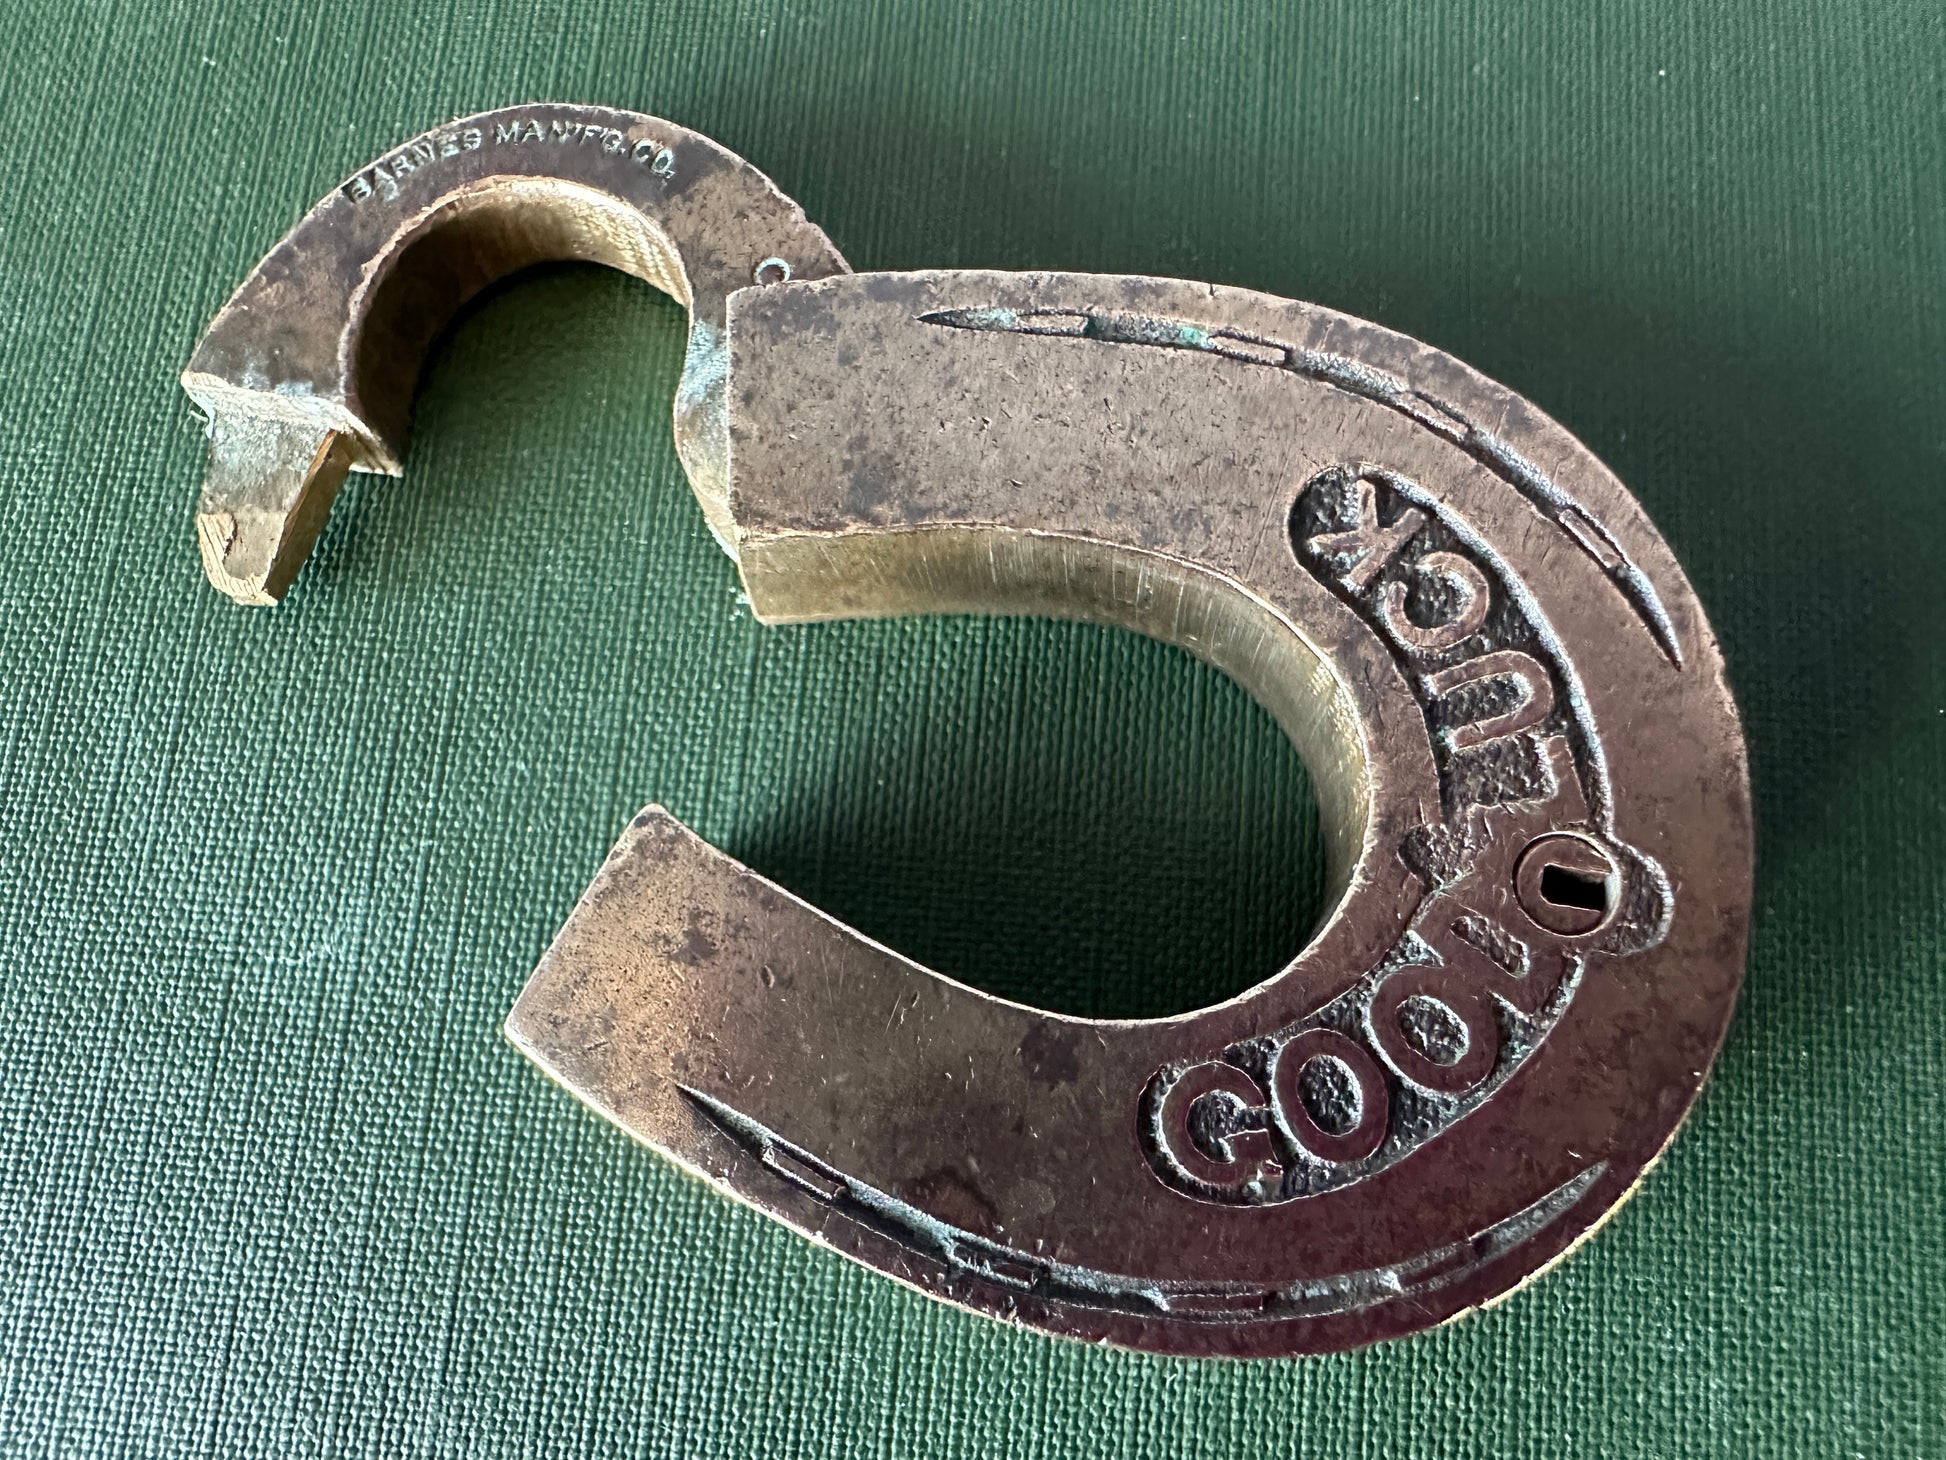 Brass Blessing : Vintage Brass Padlock - Lock with Key - Brass Made - Best  Collection - Working Lock (3055)